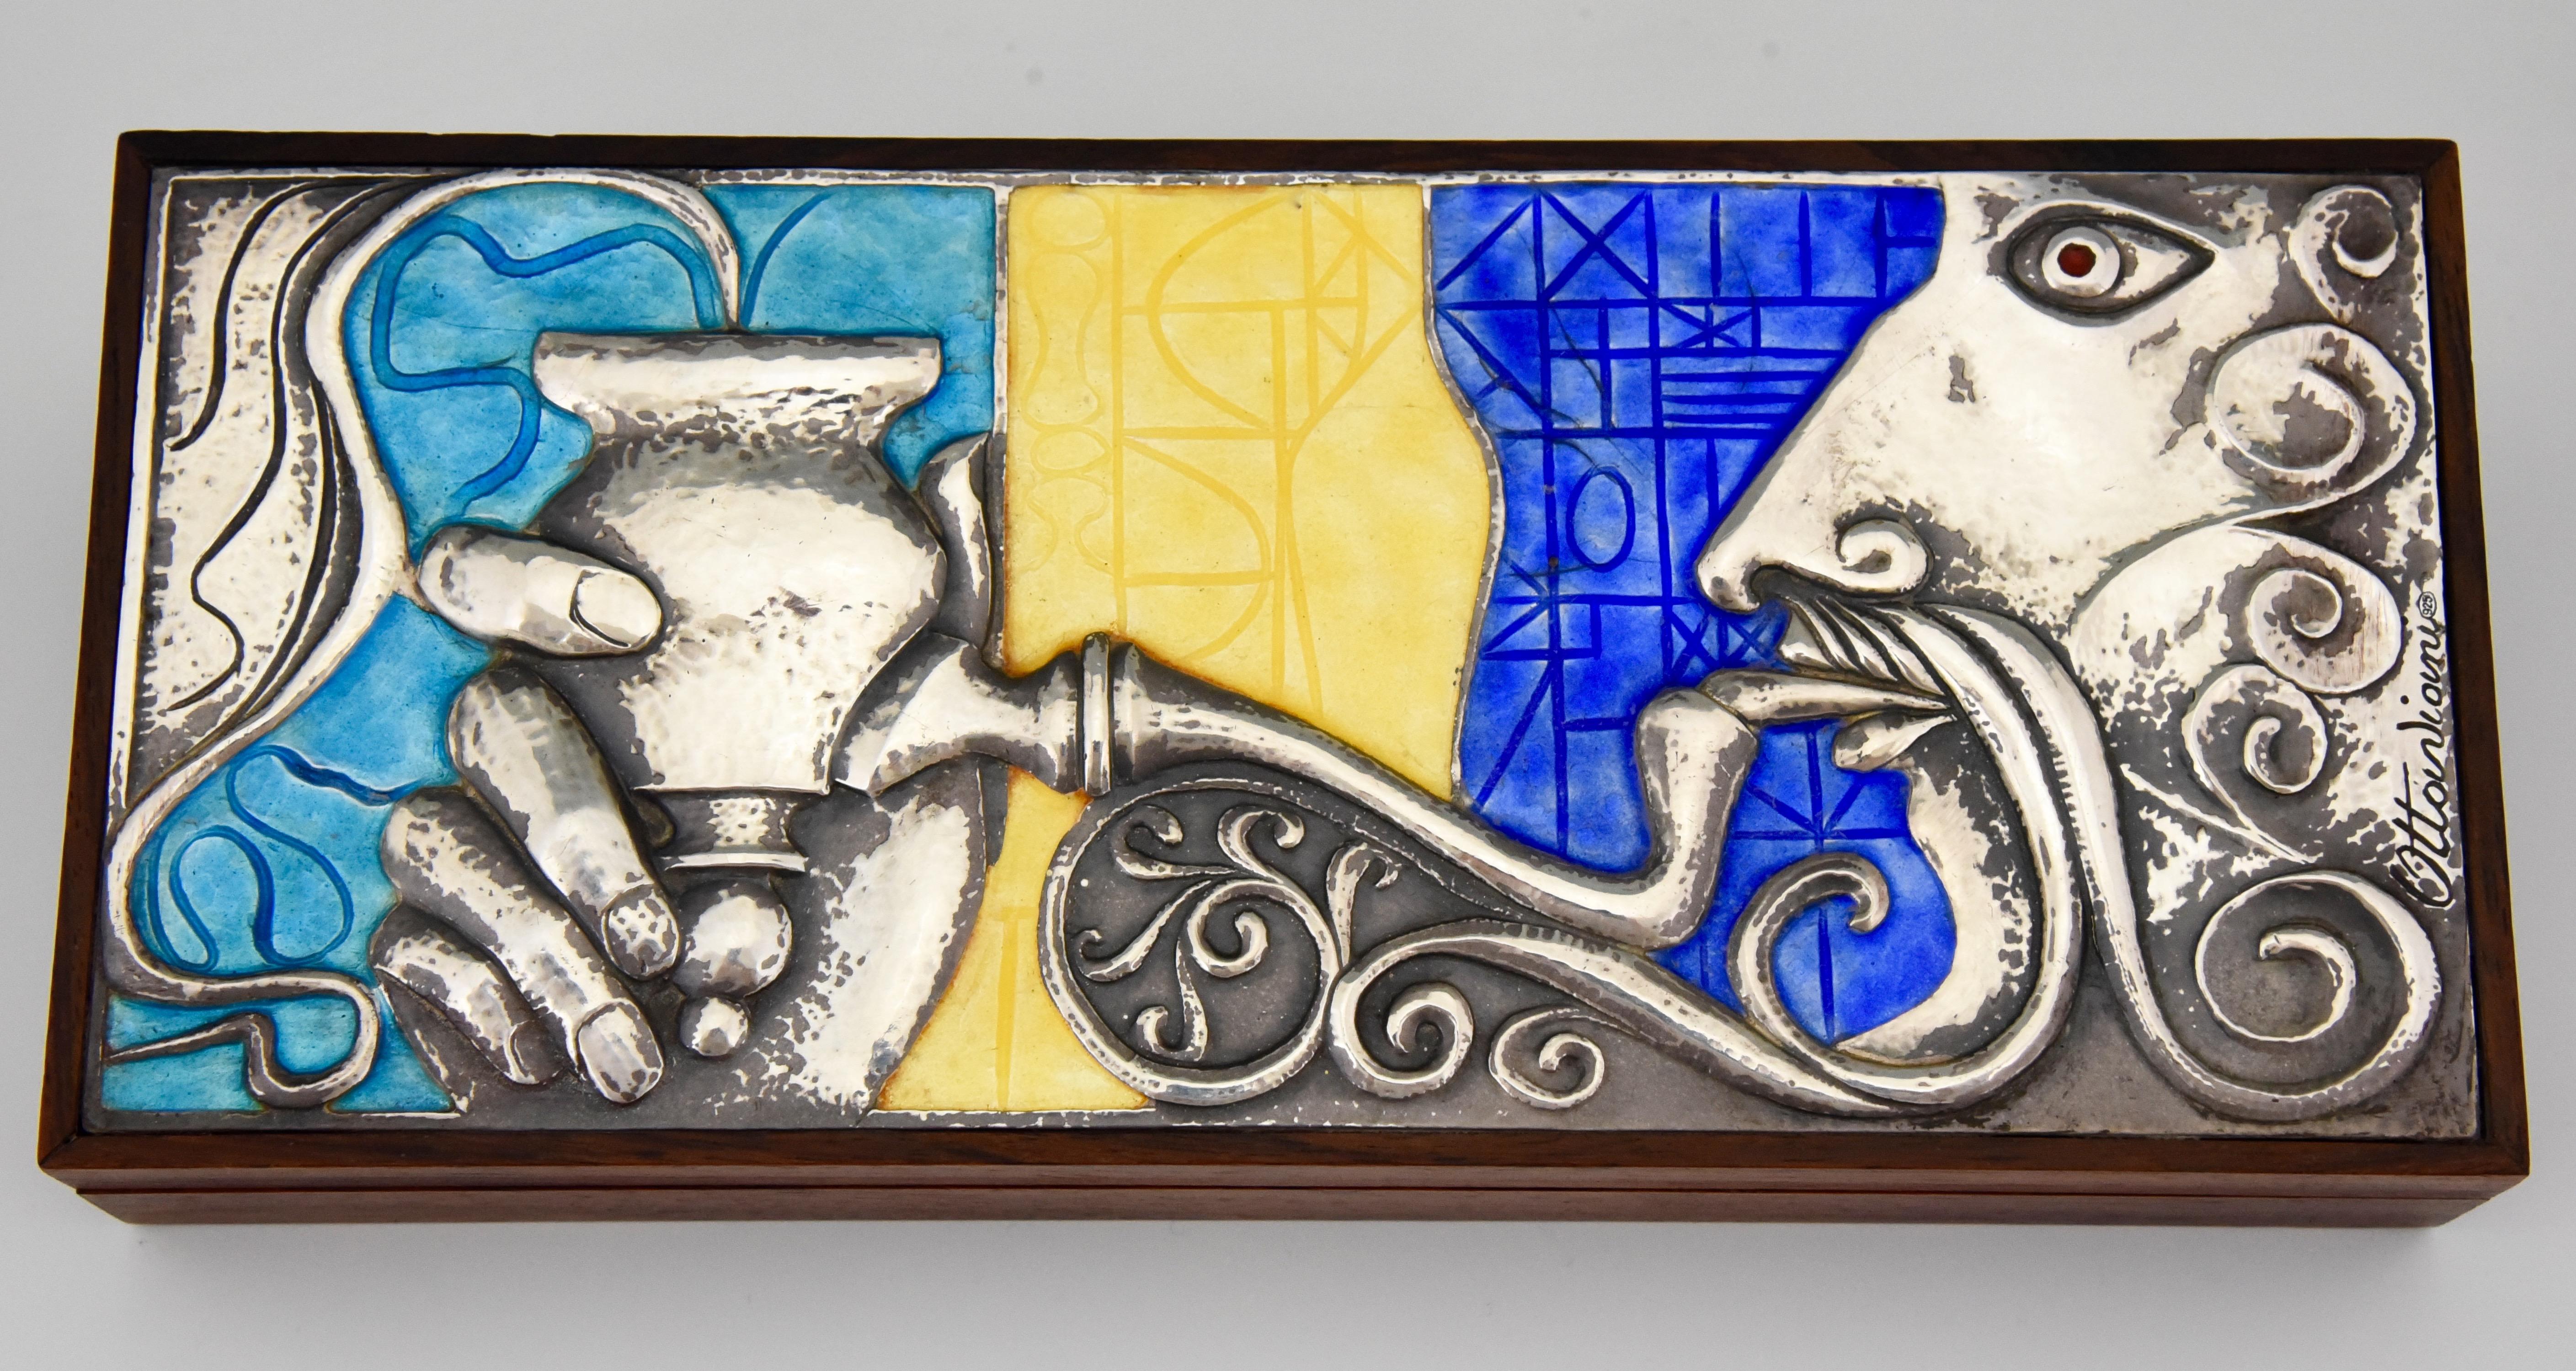 Midcentury sterling silver box with enamel and rosewood picturing a man smoking a water pipe. Beautiful colors for the enamel: blue, yellow and turquoise. Signed by Ottaviani, Italy, 1960.
Ottaviani (1945) is a jewelry and silver firm located in